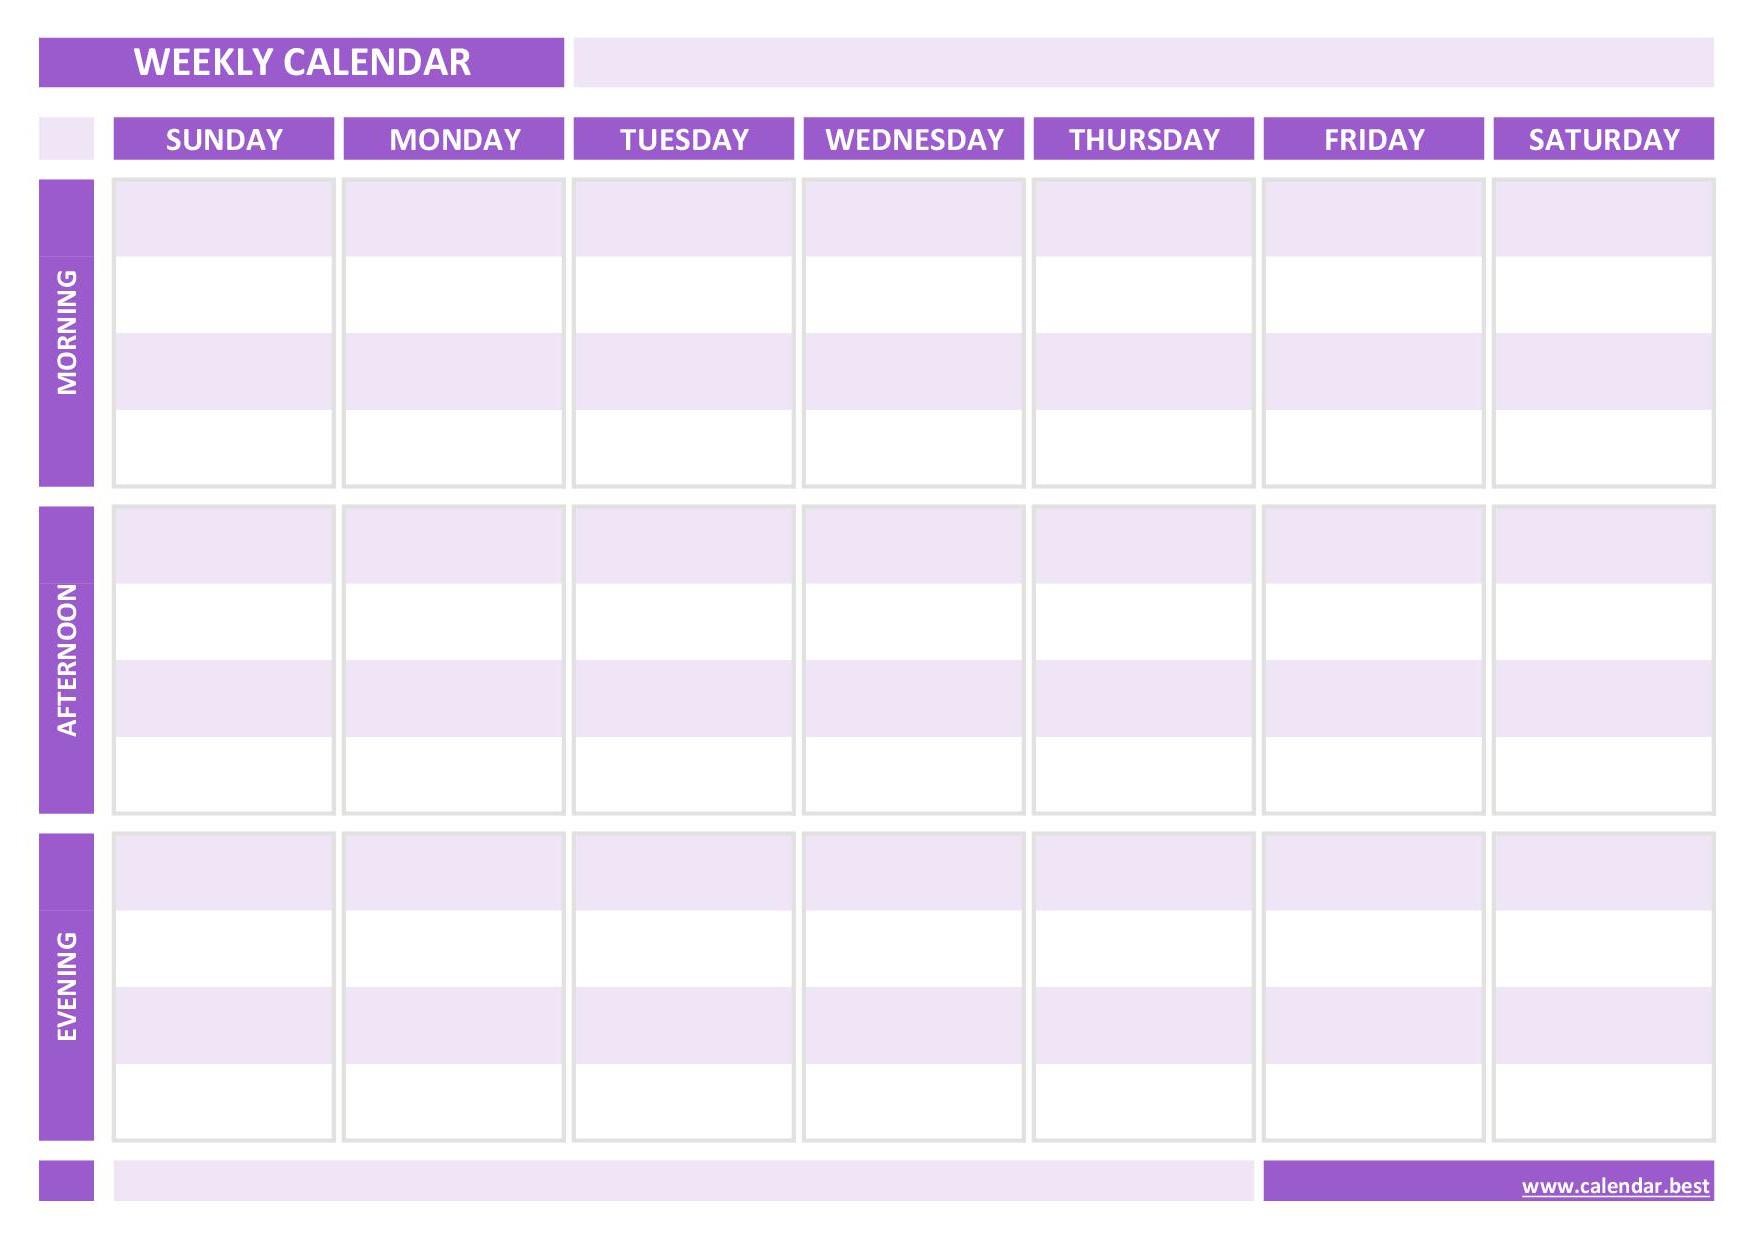 weekly calendar template with time slots 61